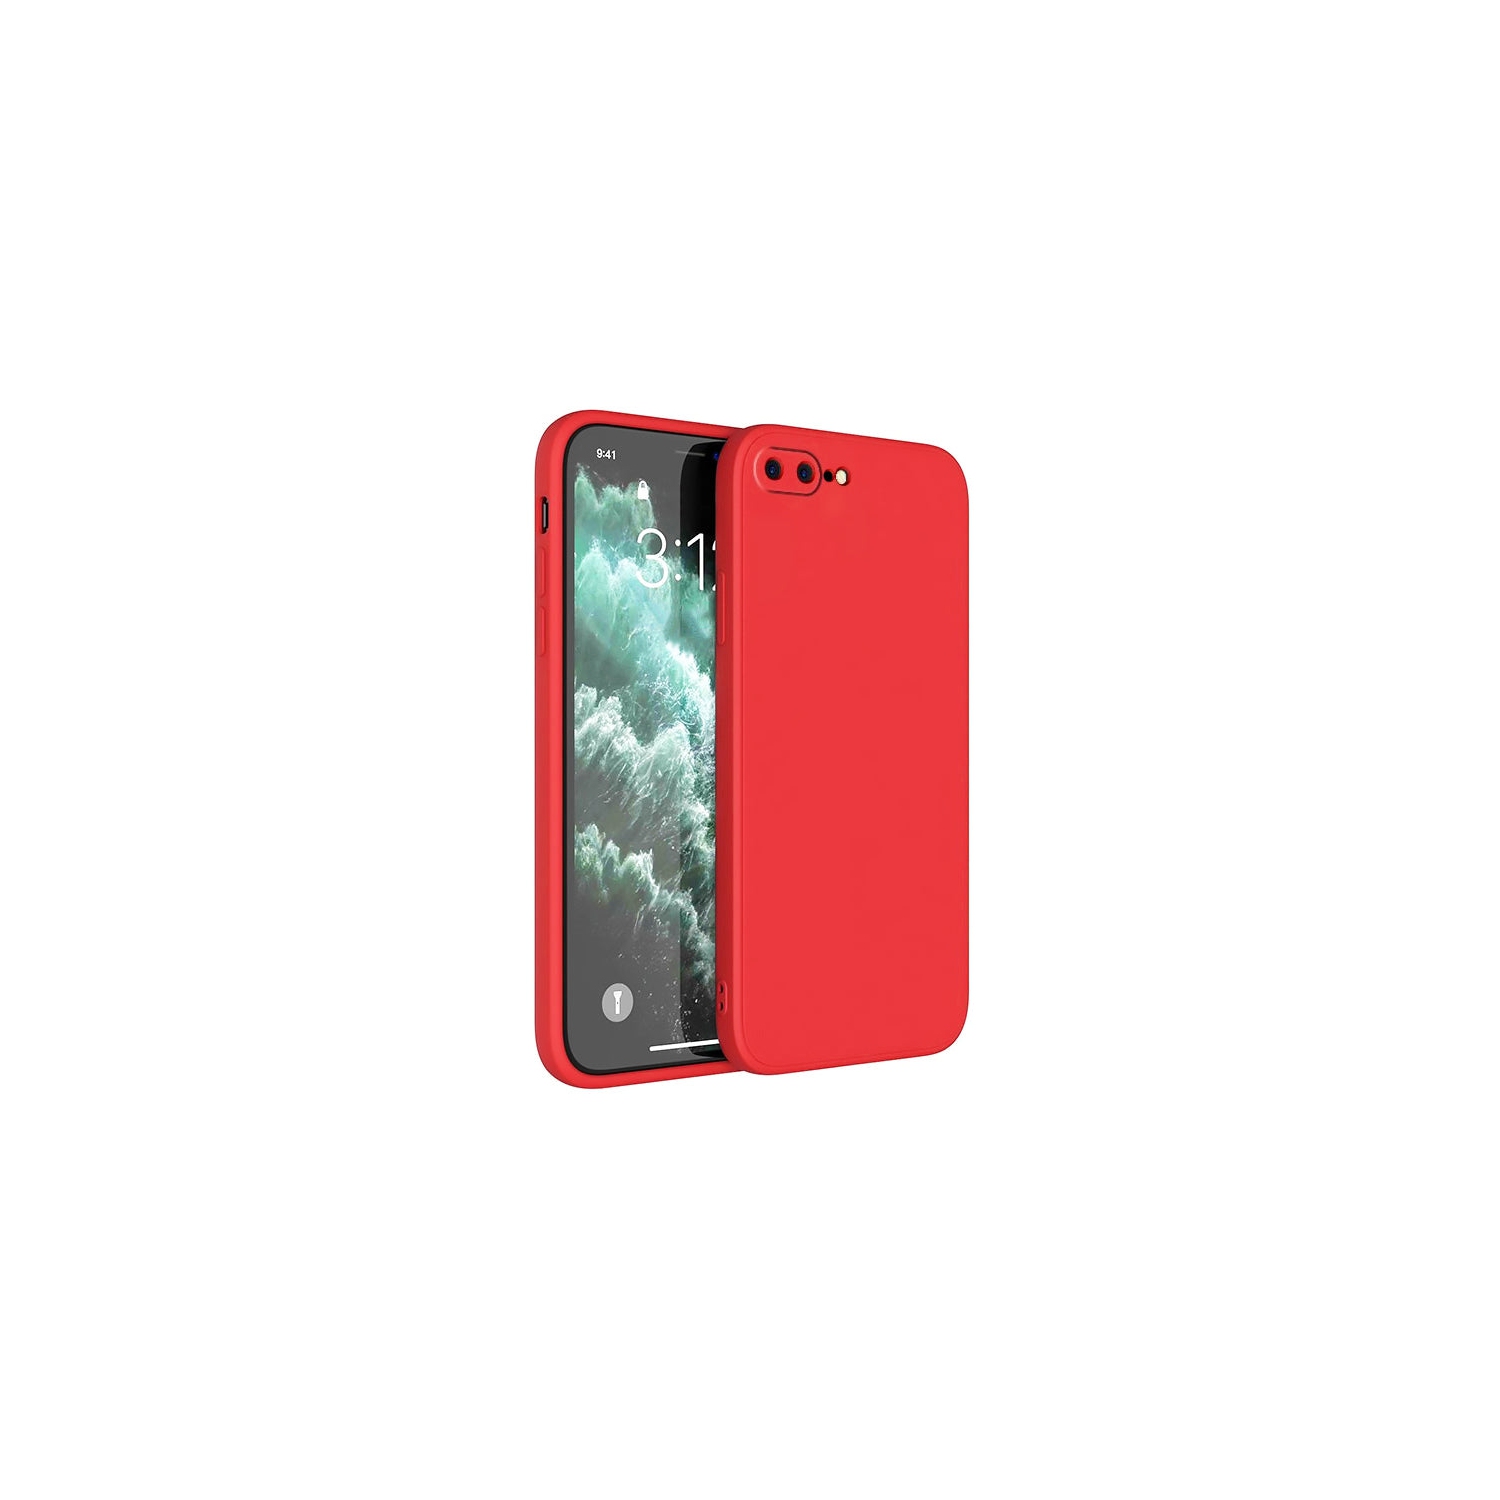 PANDACO Soft Shell Matte Red Case for iPhone 7 Plus or iPhone 8 Plus